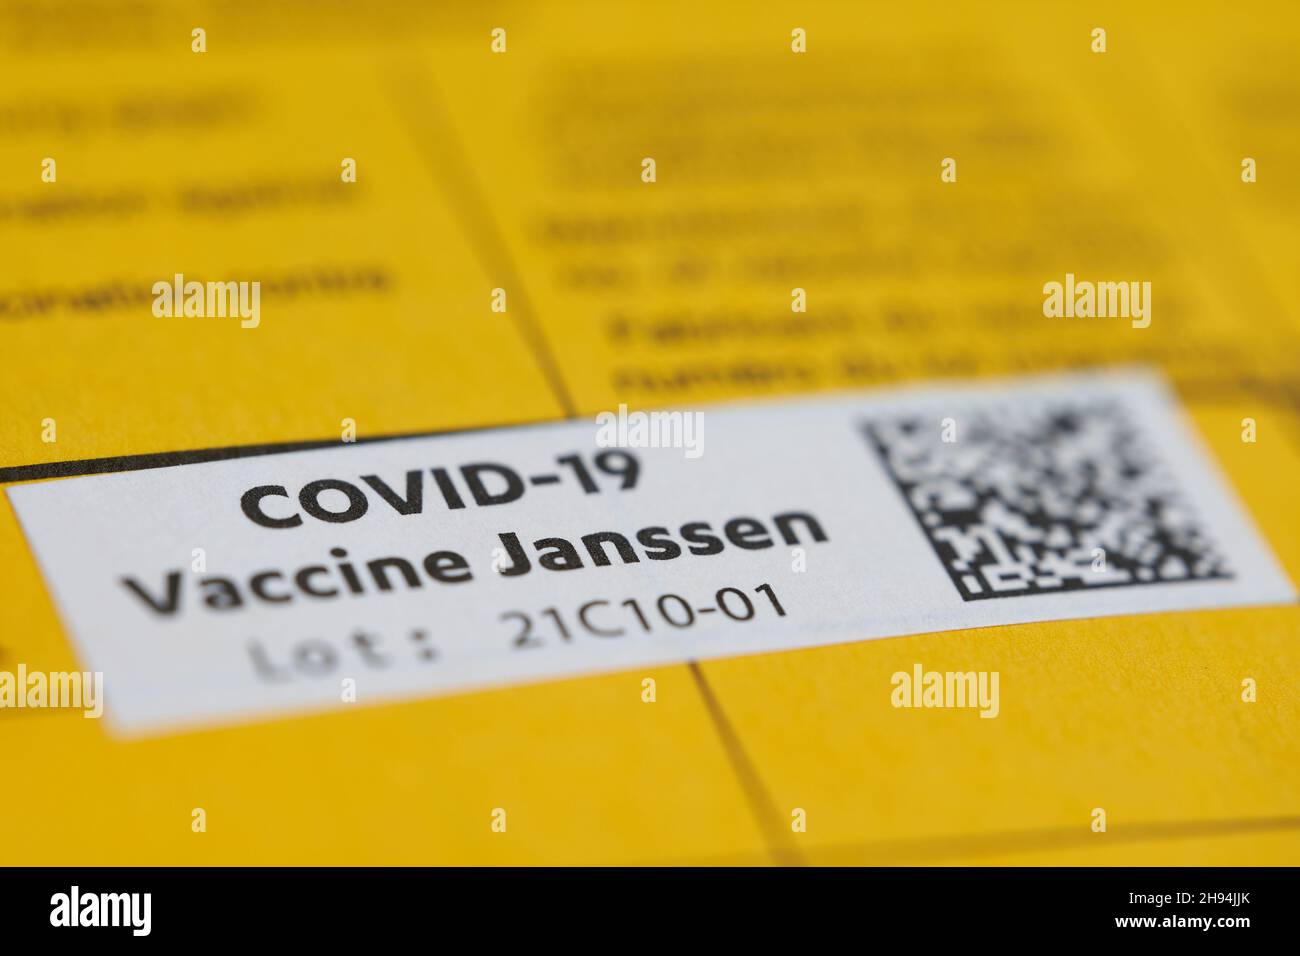 Stuttgart, Germany - May 15, 2021: 1 White etiquette in a vaccination card. Confirmation of vaccination against corona virus covid-19. Yellow page in Stock Photo